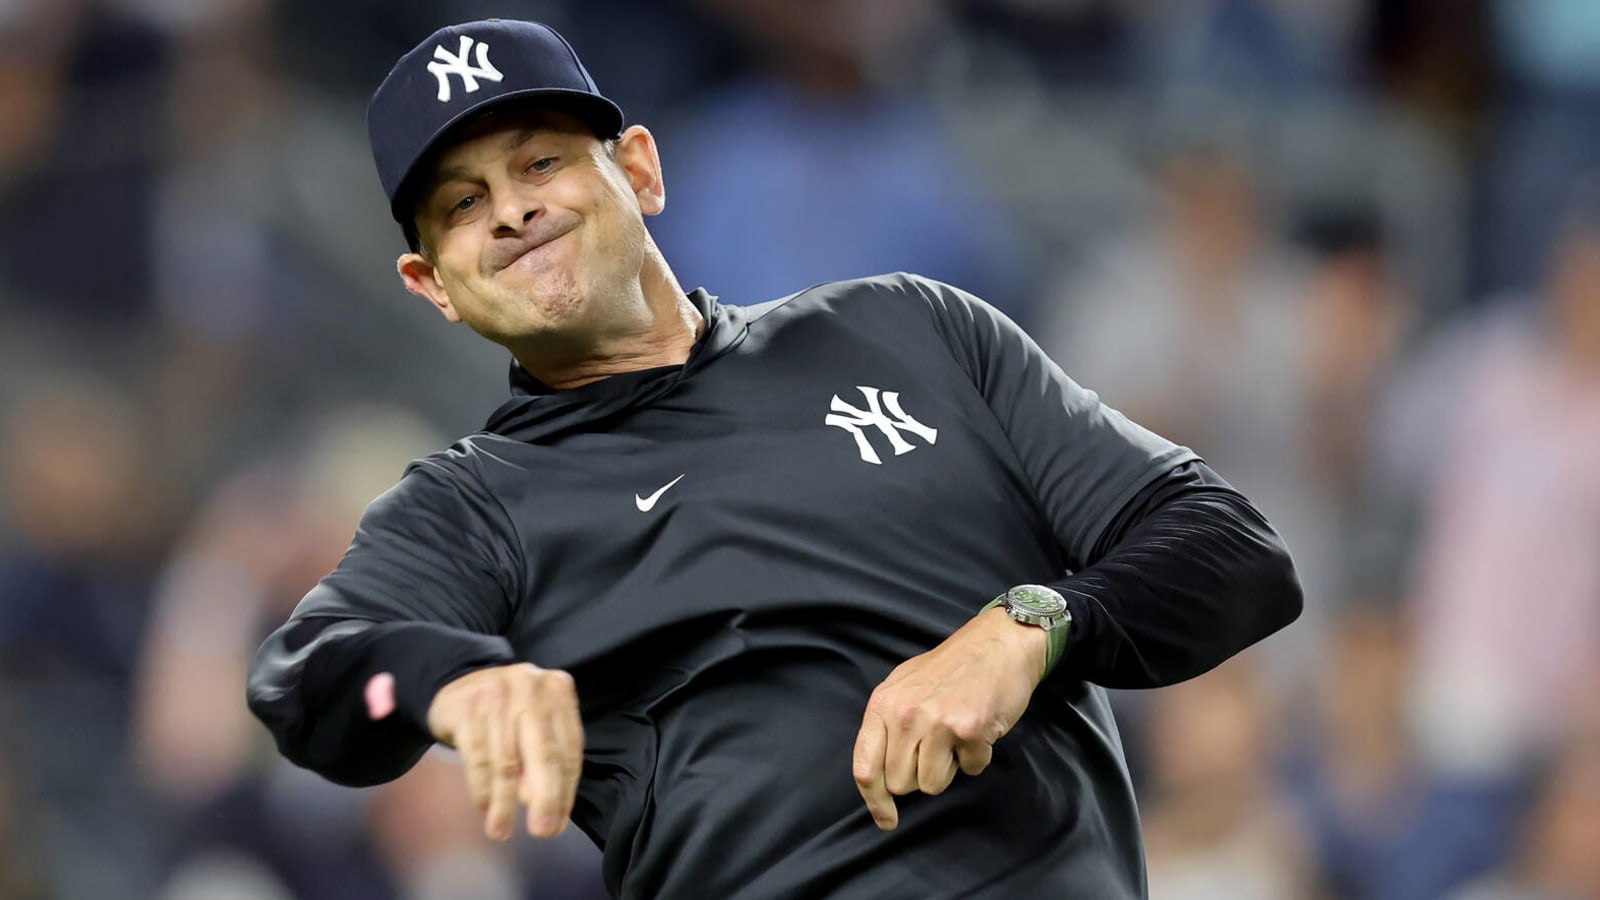 Aaron Boone has stern message for Yankees amid slump